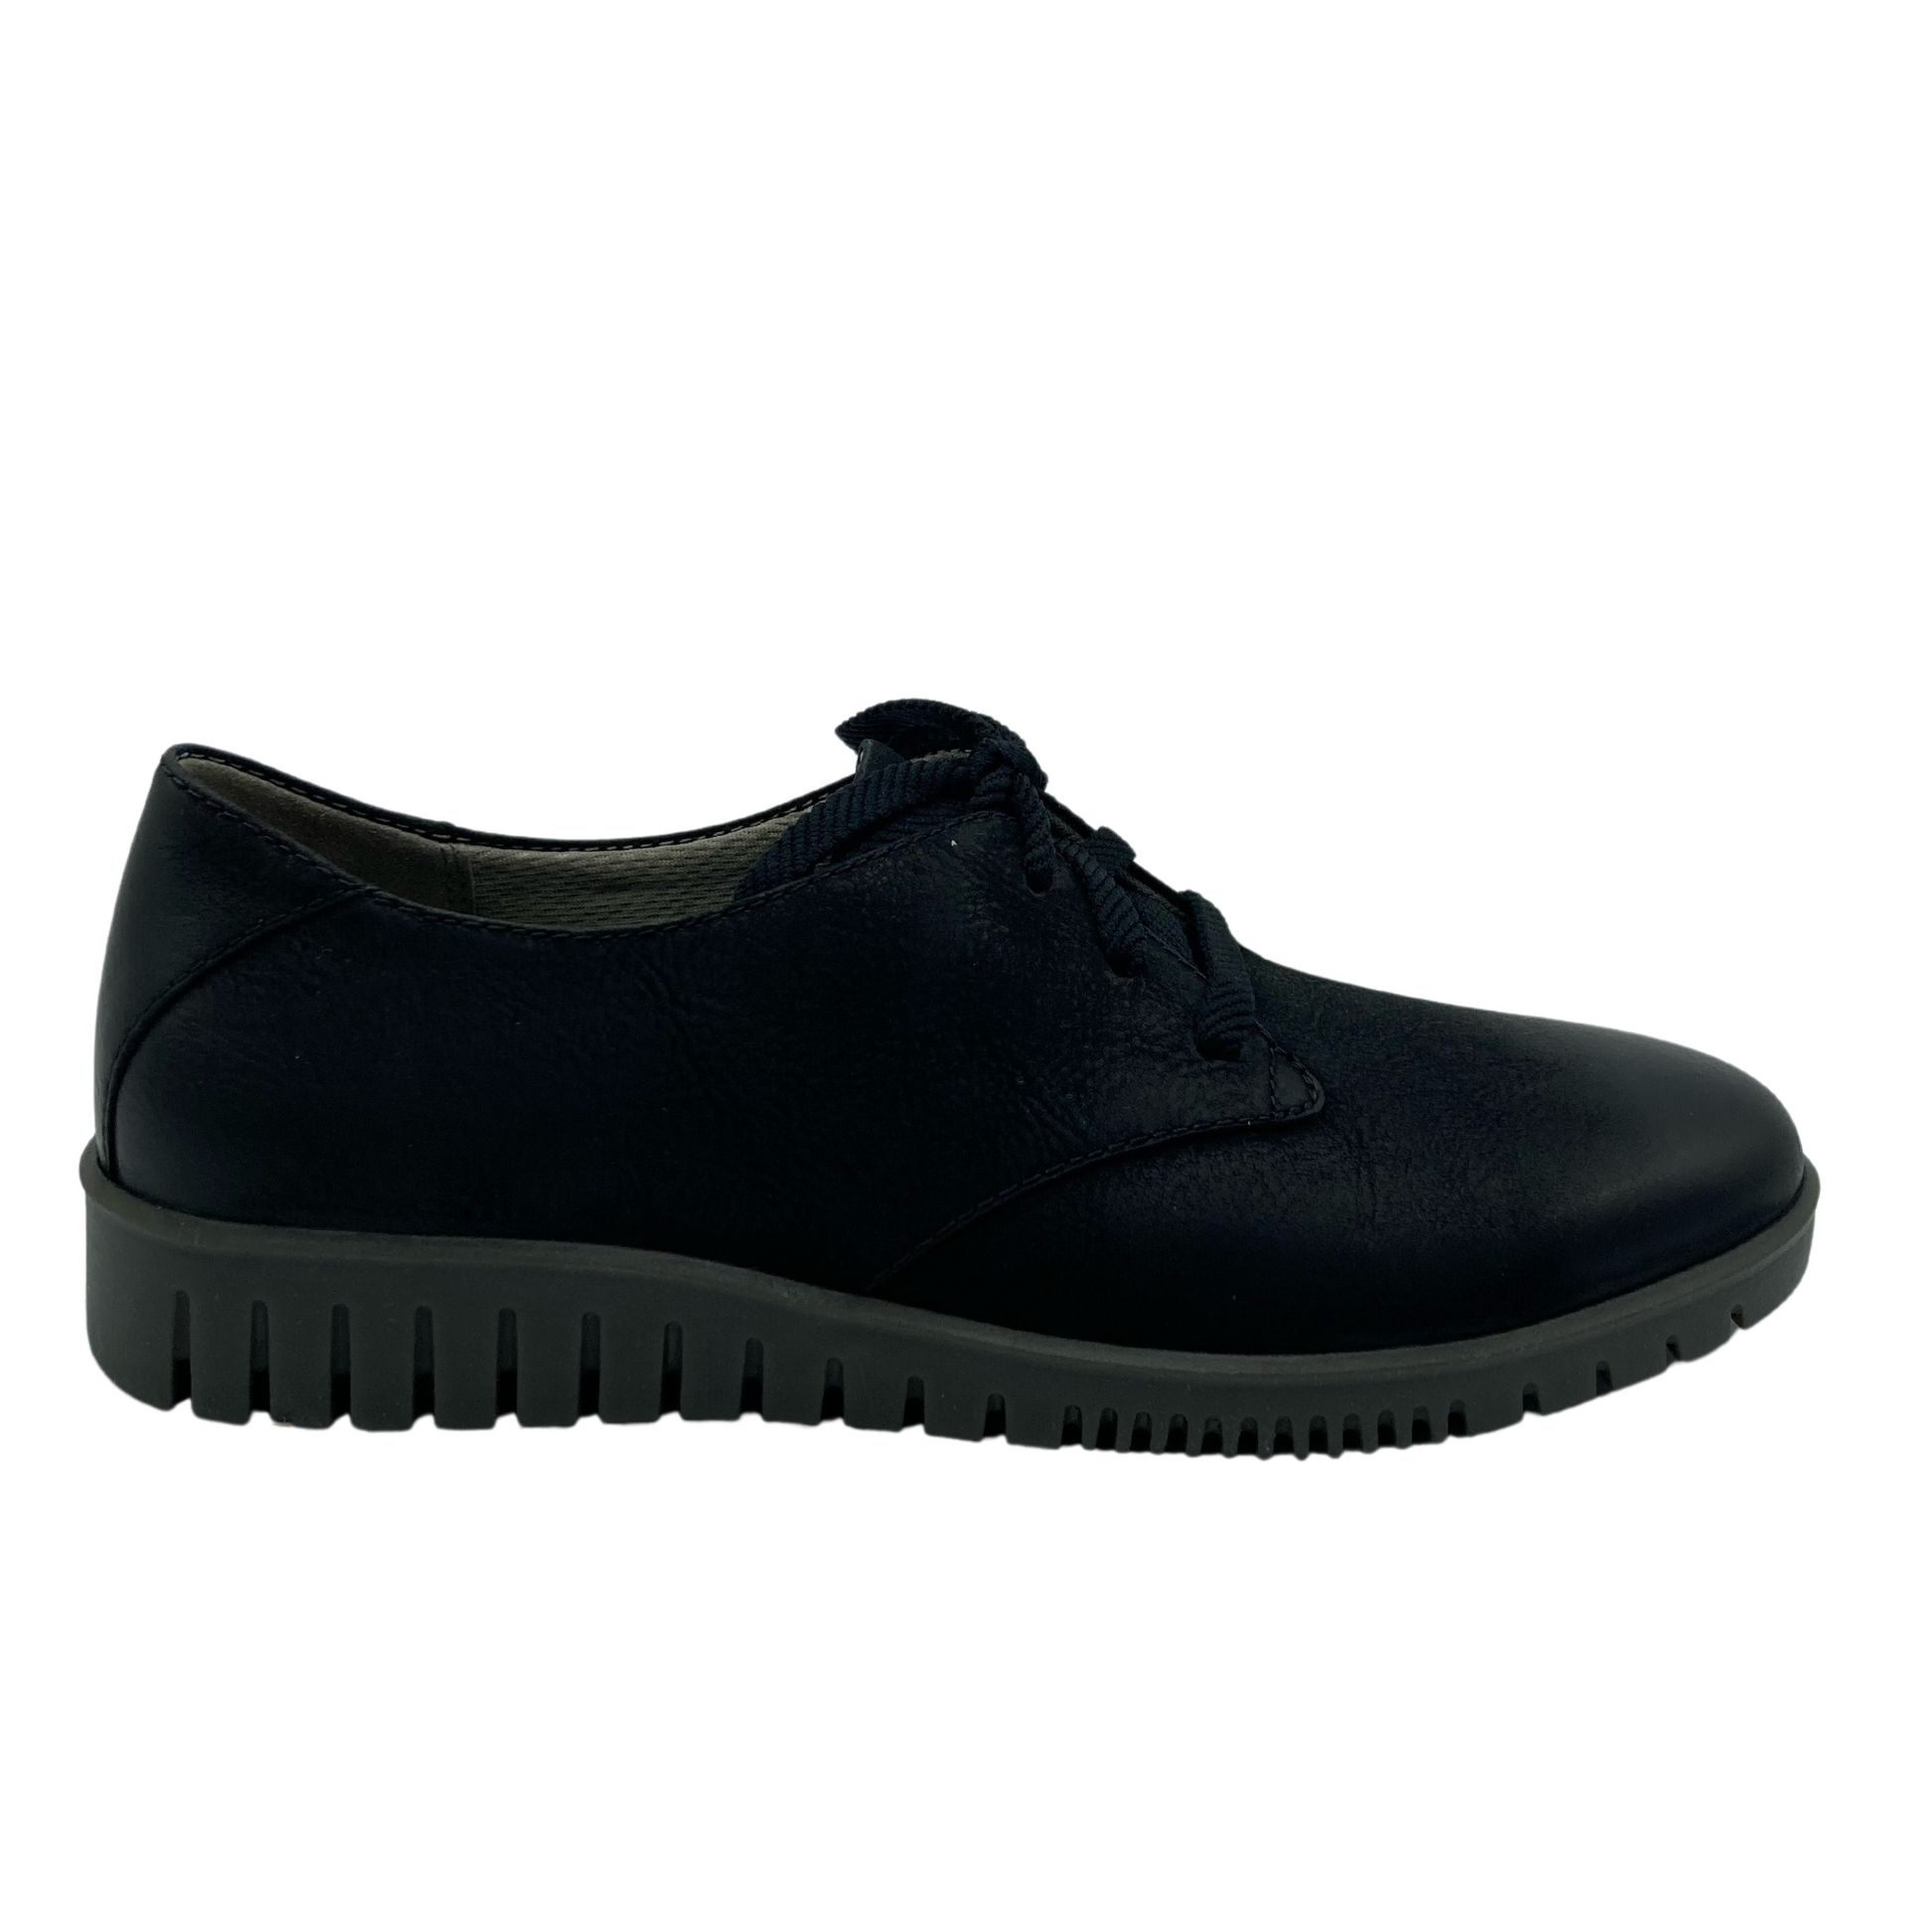 Right facing side view of black leather oxford with grey rubber soles